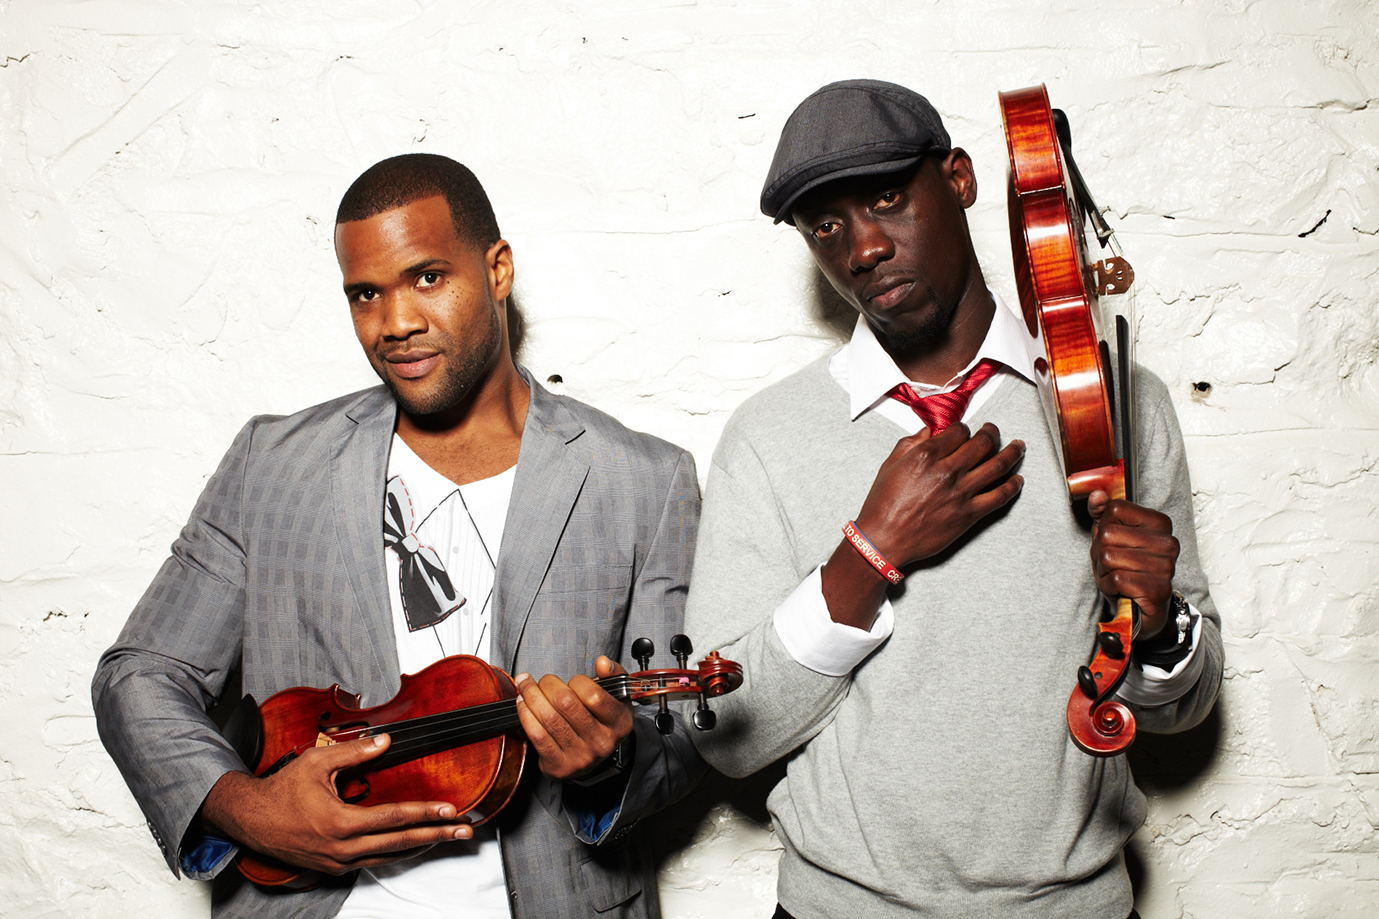 Courtesy photo  Black Violin, two classically trained violinists who blend the sounds of jazz, hip-hop, funk and classical music, will perform before a presentation by Martin Luther King III, son of Dr. Martin Luther King Jr., at 7 p.m. Saturday, Feb. 23, in Sturtz Theater, Jefferson Community College, Watertown. There is no cost to attend; however, tickets are required for admittance. For more information, contact the JCC Student Activities Center at 786-2431.